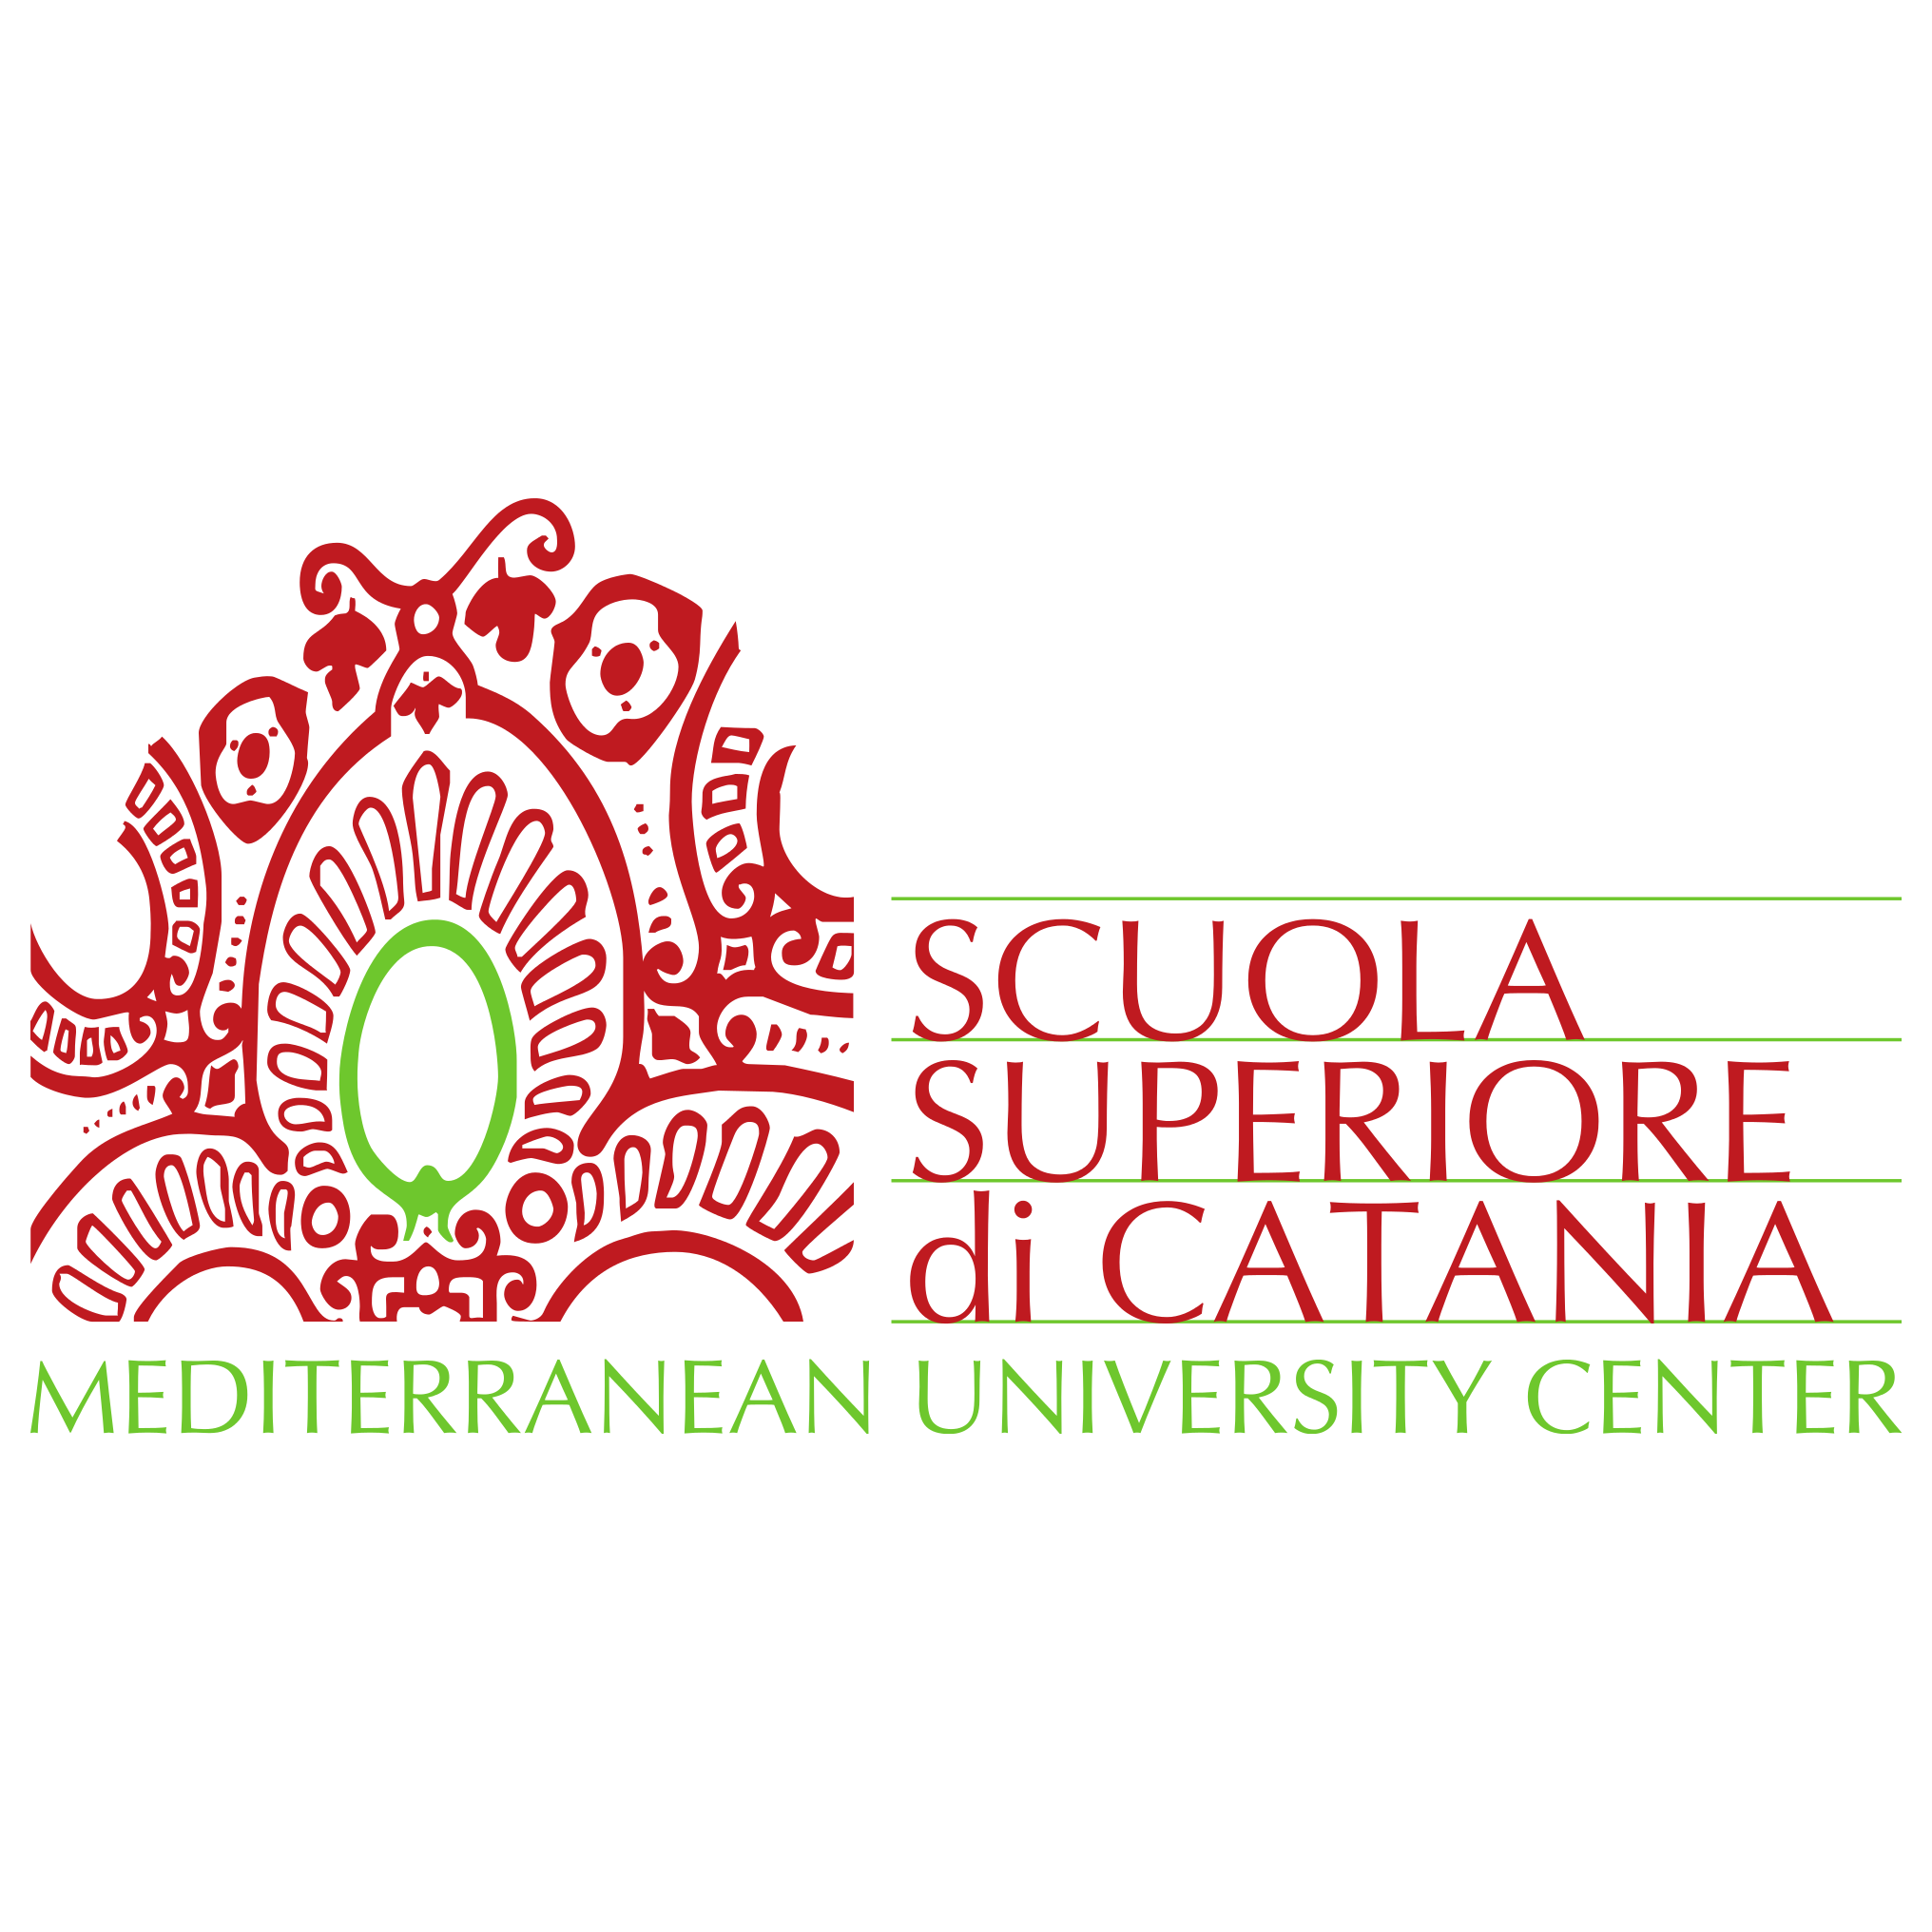 SSC develops the skills of young students enrolled at the University of Catania through integrative university courses and beforehand research initiation.